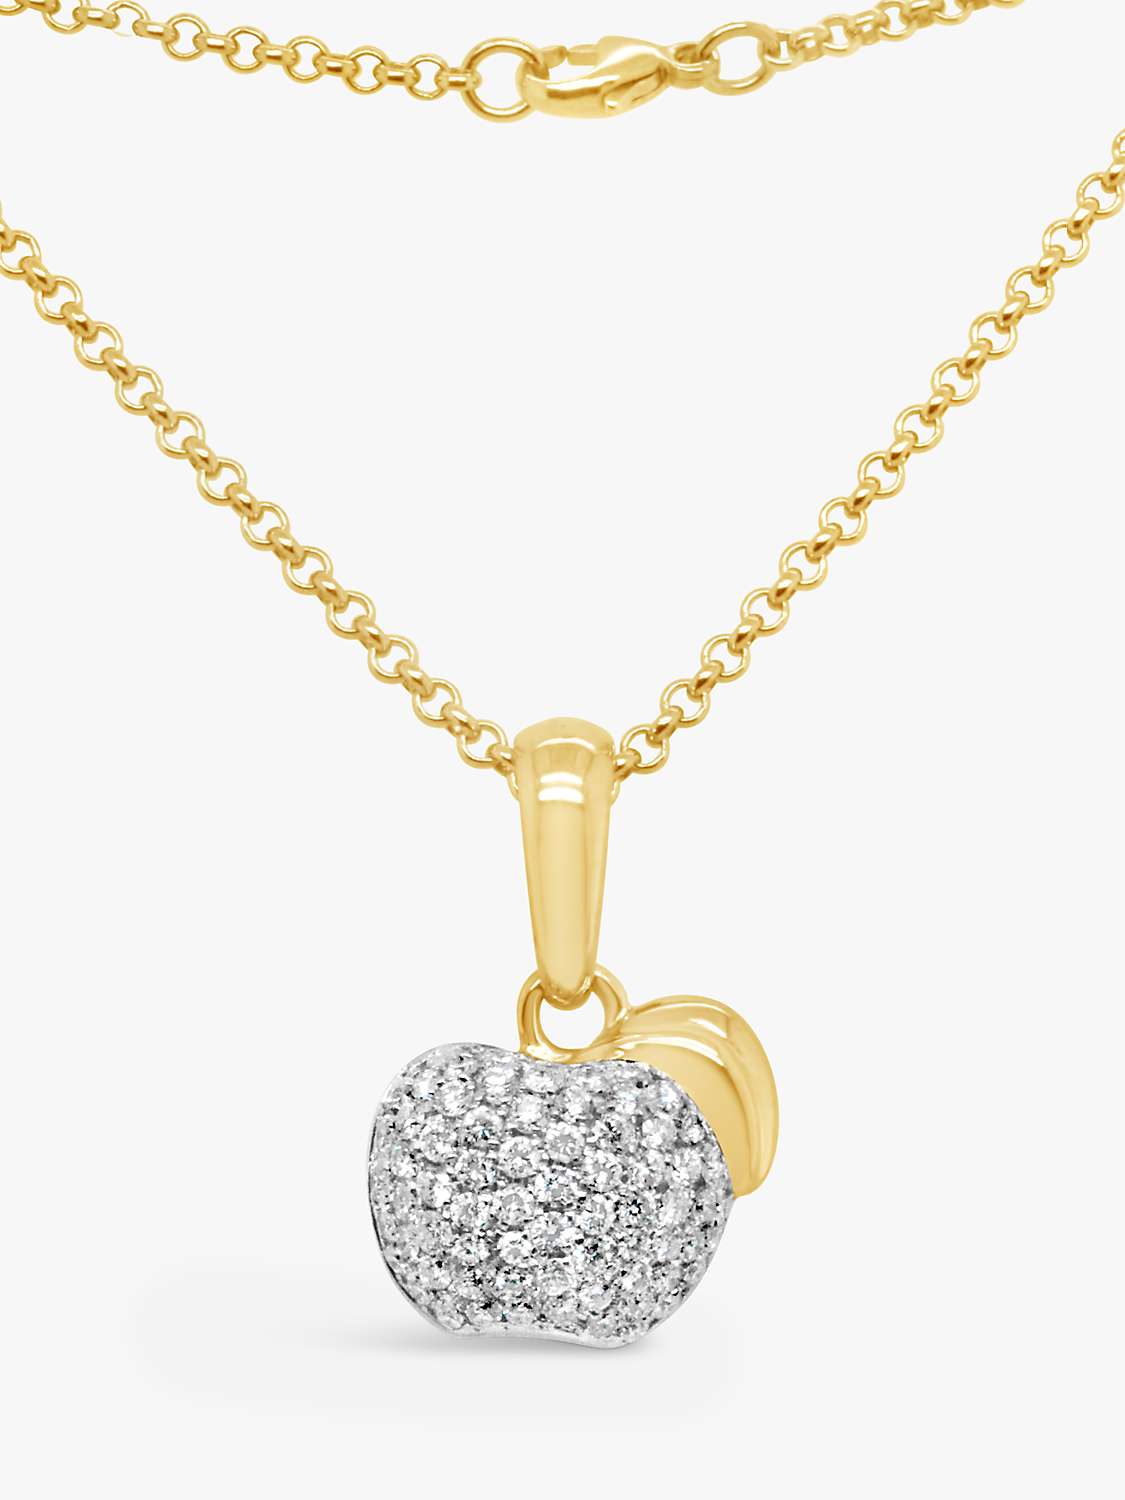 Buy Milton & Humble Jewellery Second Hand Chimento 18ct Yellow Gold and Diamond Apple Pendant Necklace Online at johnlewis.com